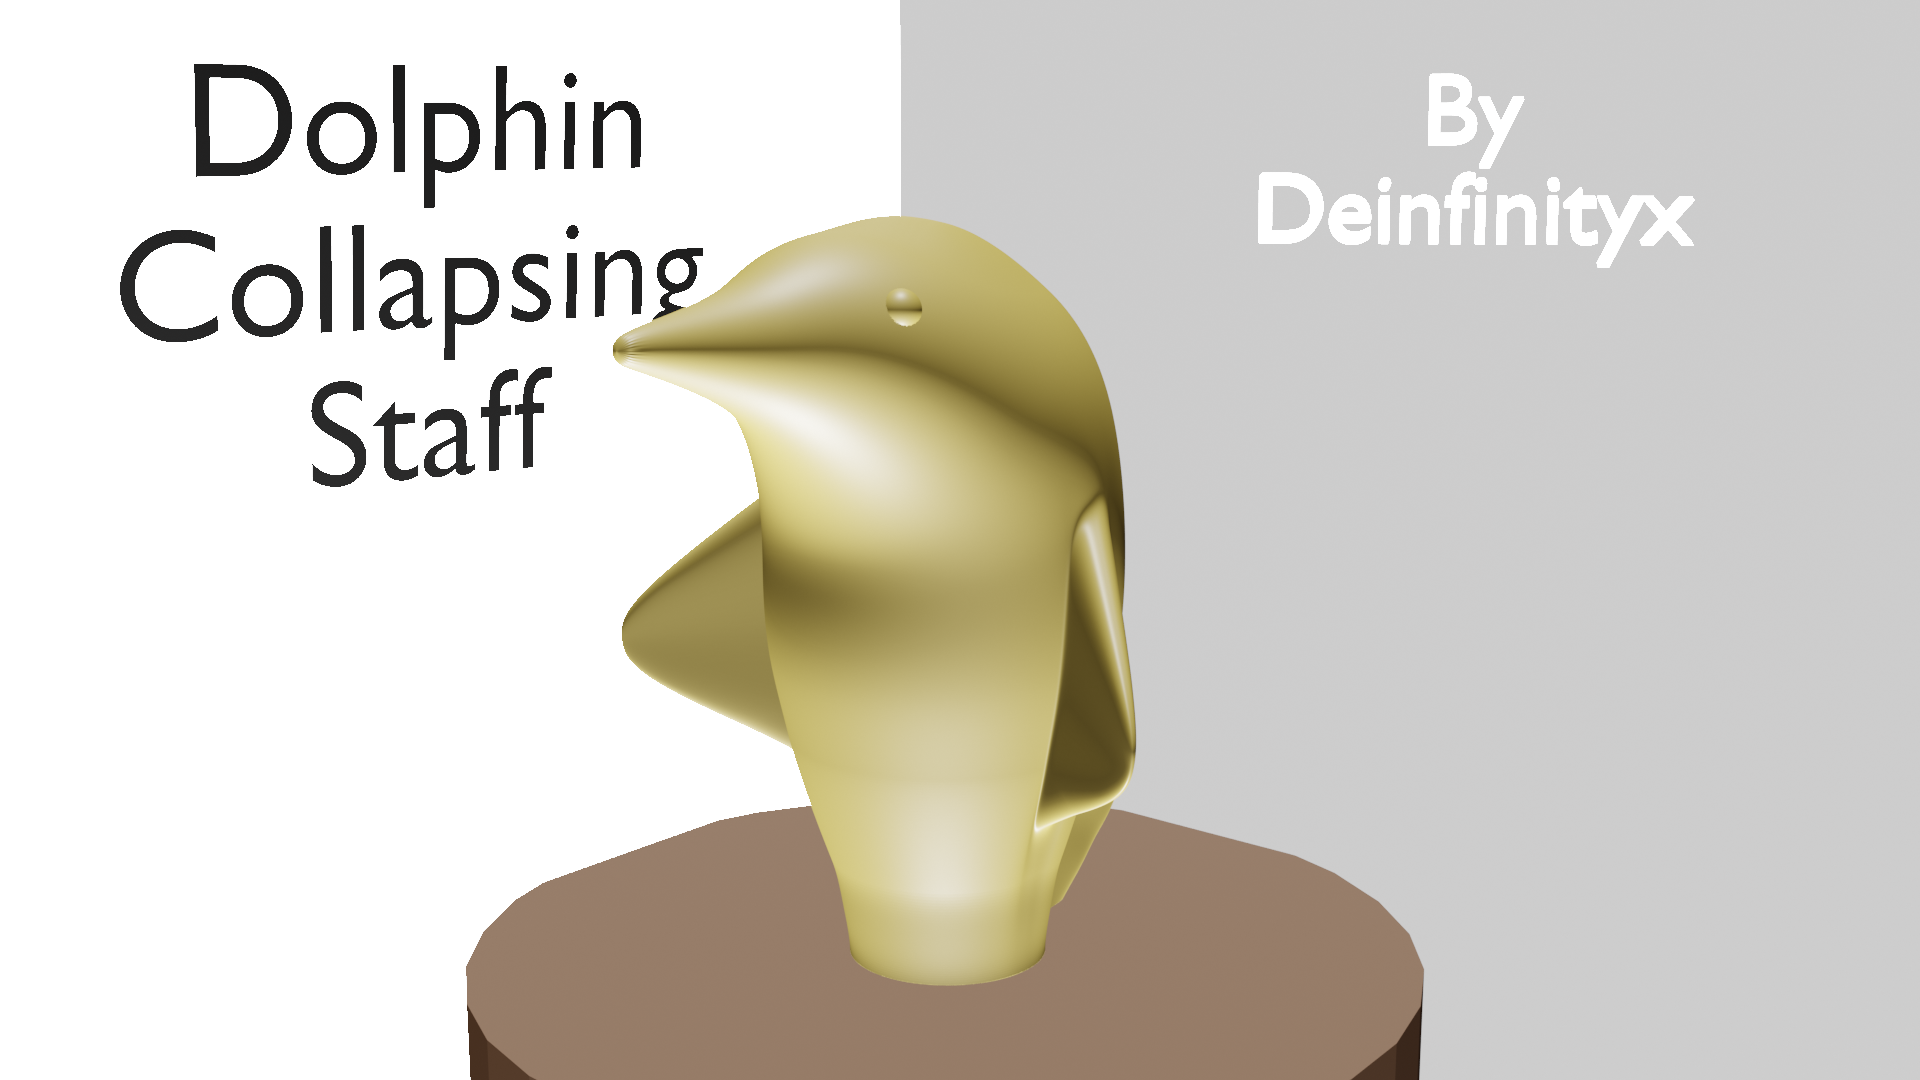 Dolphin Collapsing Staff